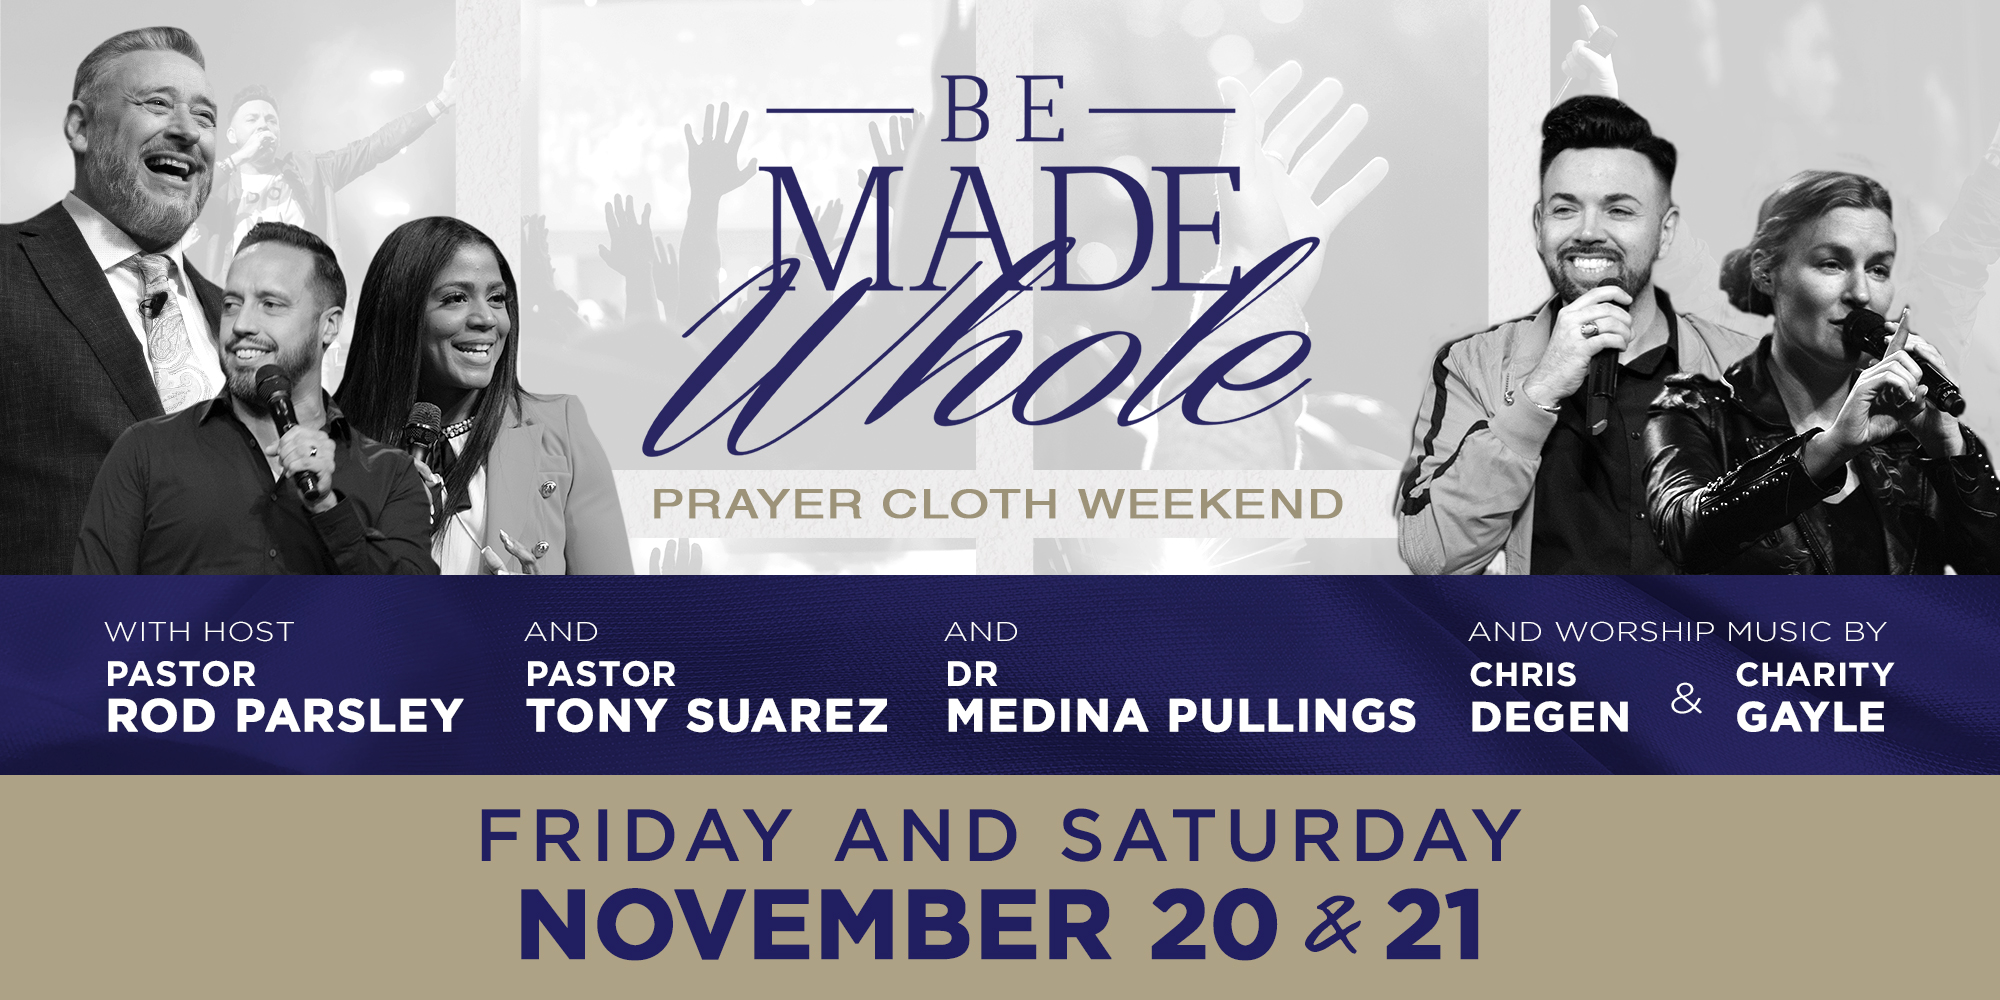 Be made whole prayer cloth weekend with host Pastor Rod Parsley and Pastor Tony Suarez and Dr Medina Pullings and worship music by Charity Gayle and Harvest Music! Friday, Saturday, and Sunday Nov. 20th thru Nov.22nd